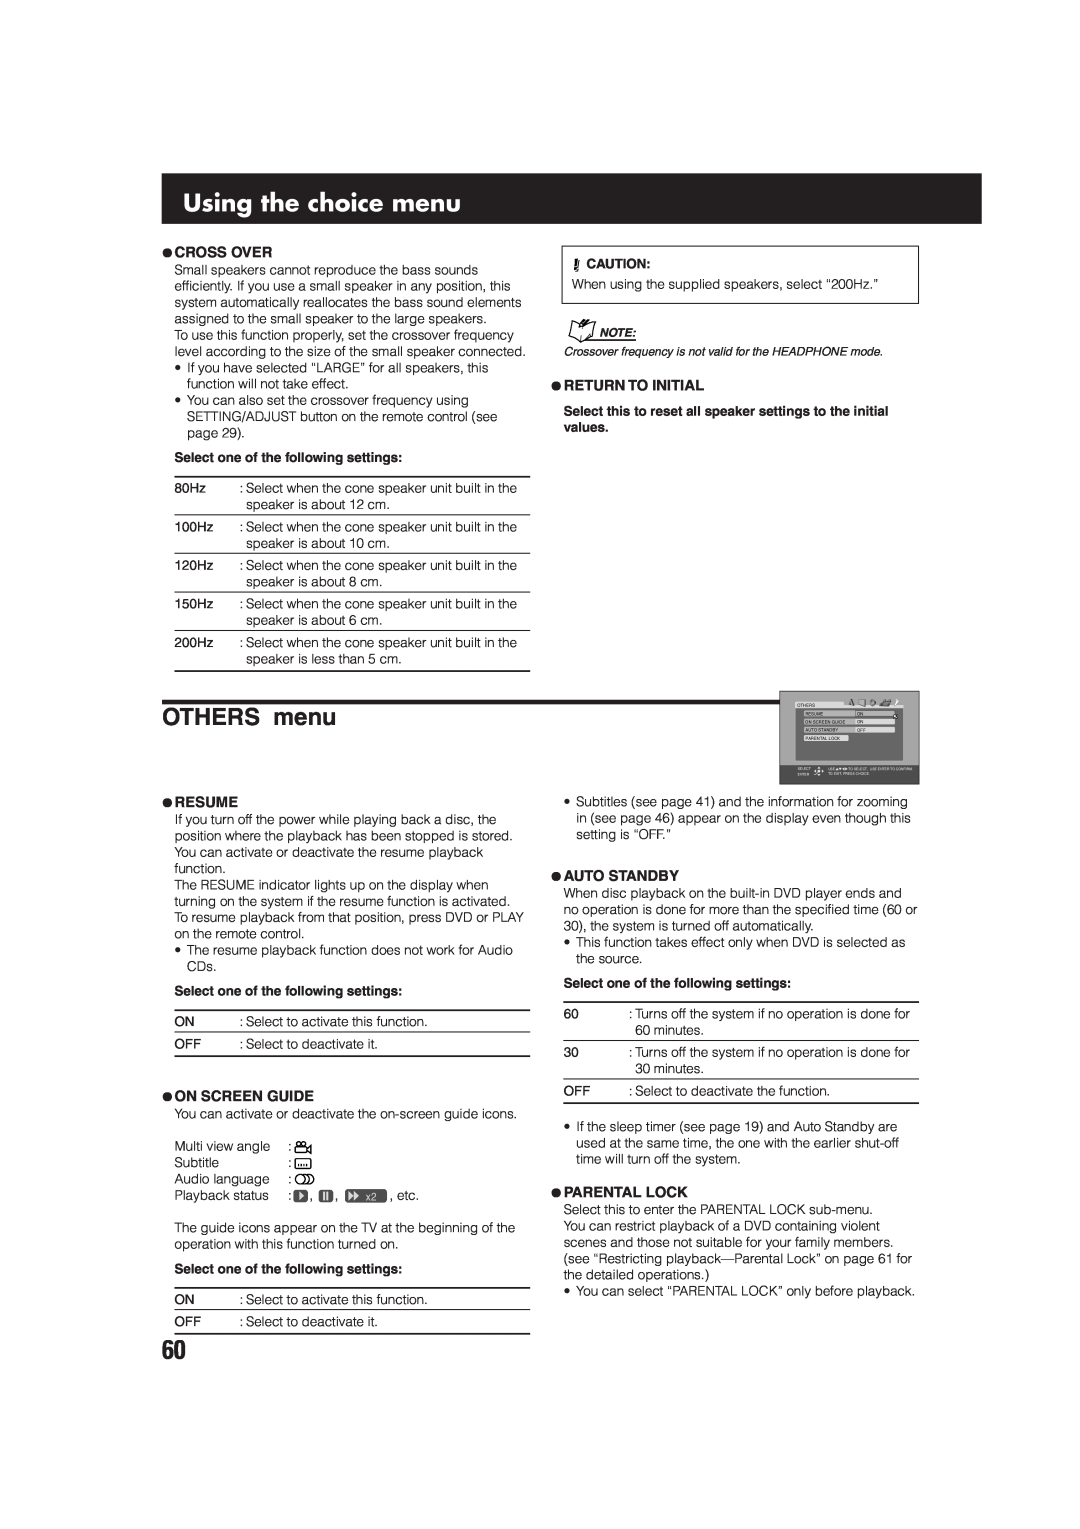 JVC SP-WA75 OTHERS menu, Using the choice menu, ¶Cross Over, ¶Return To Initial, ¶Resume, ¶On Screen Guide, ¶Auto Standby 